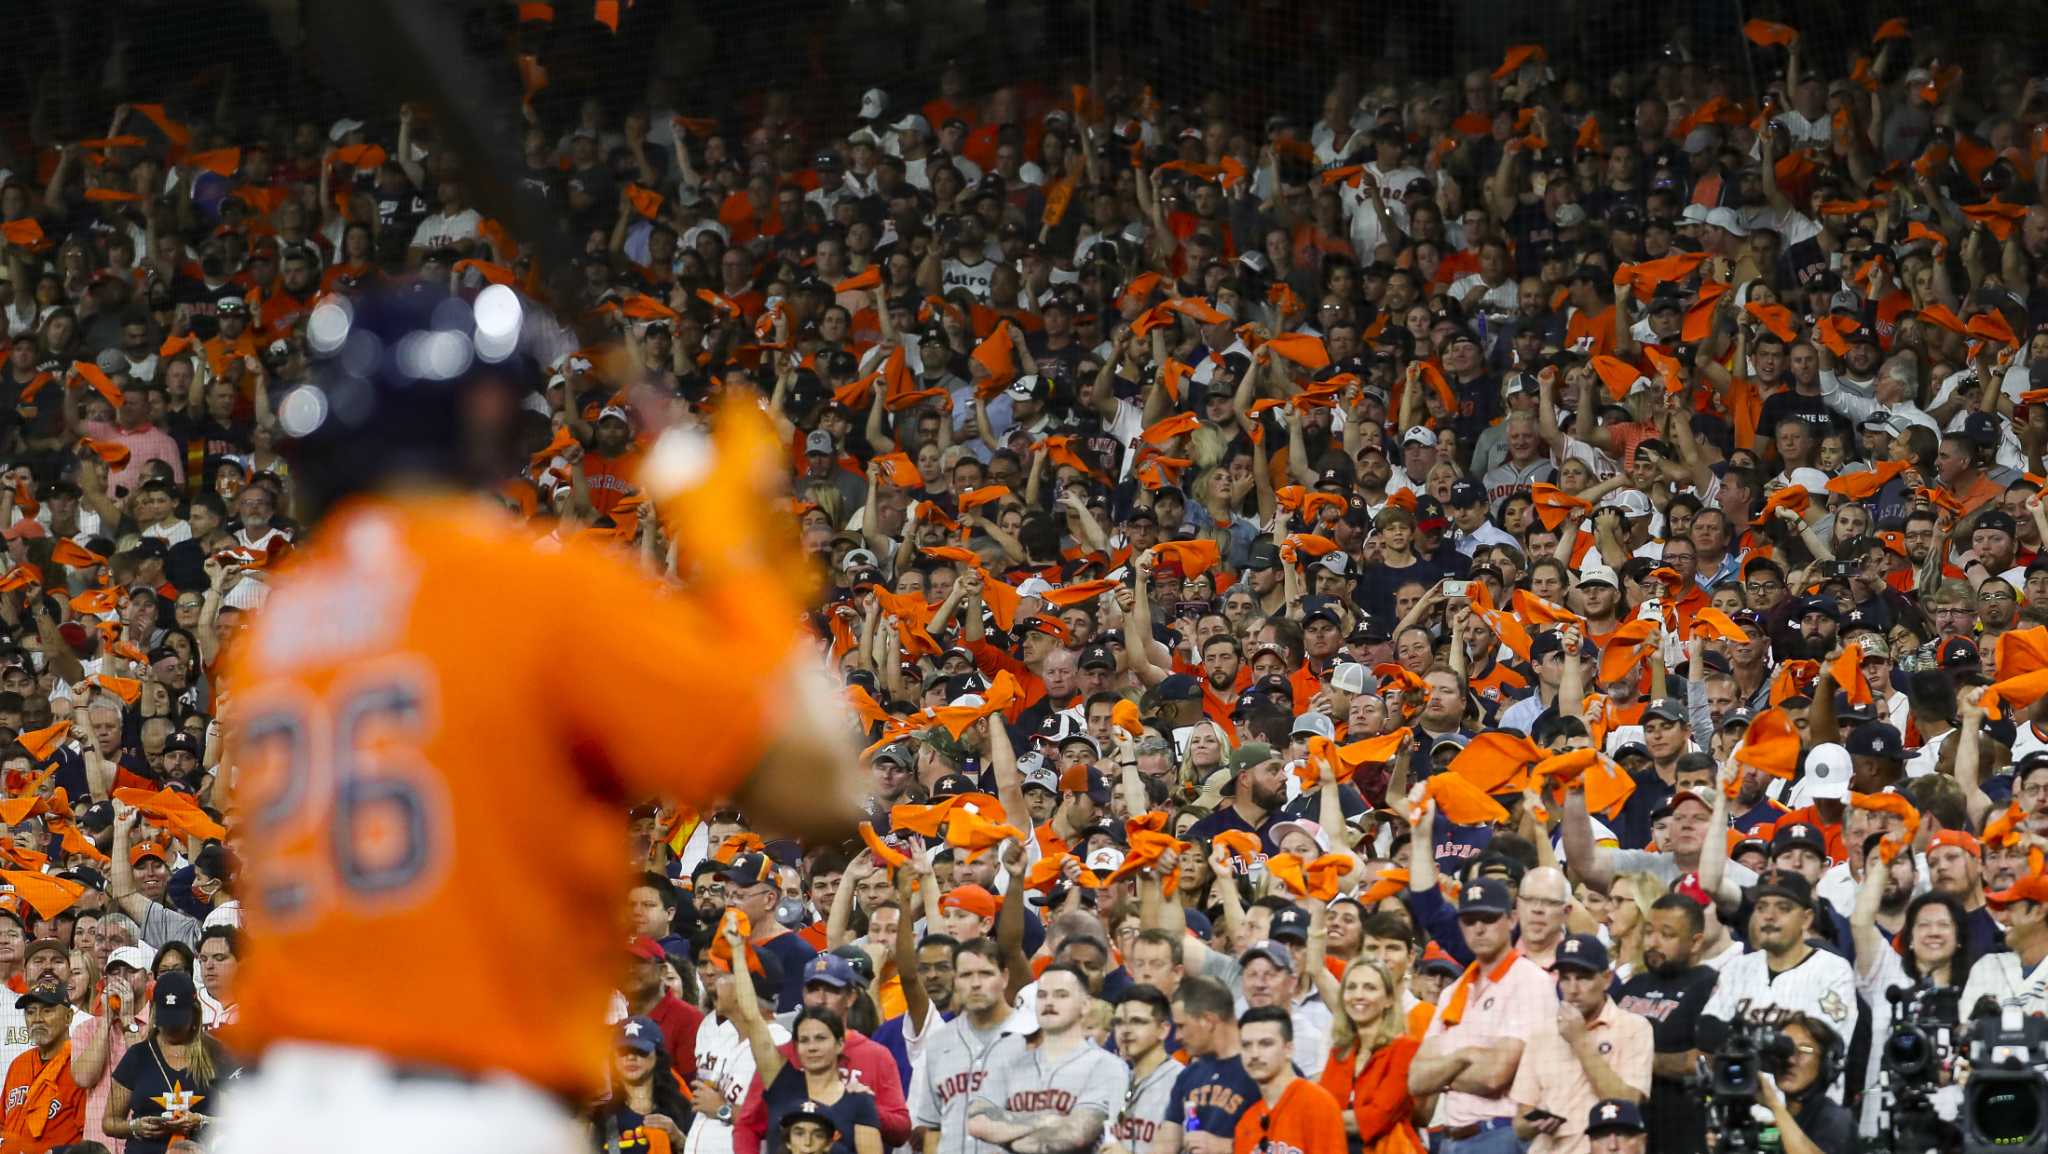 Houston Astros - Be one of the first 10,000 fans next